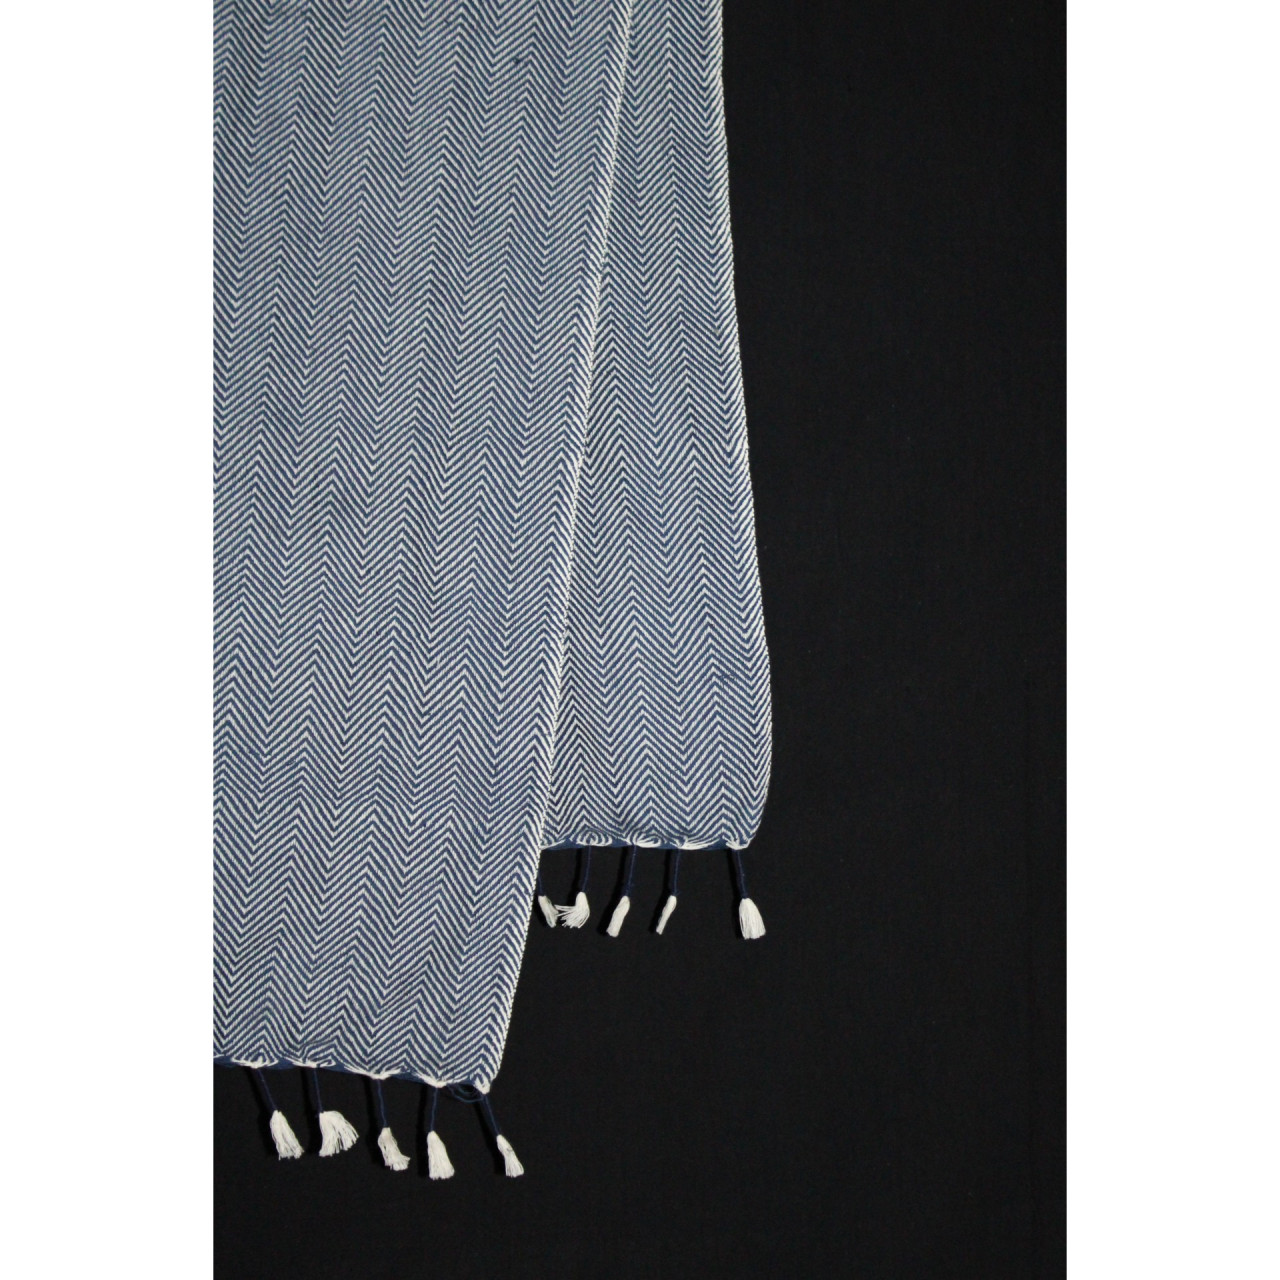 (1430) Cotton and khadi  Azo-free dyed throw from Bihar - Indigo, white, textured, piped fringes